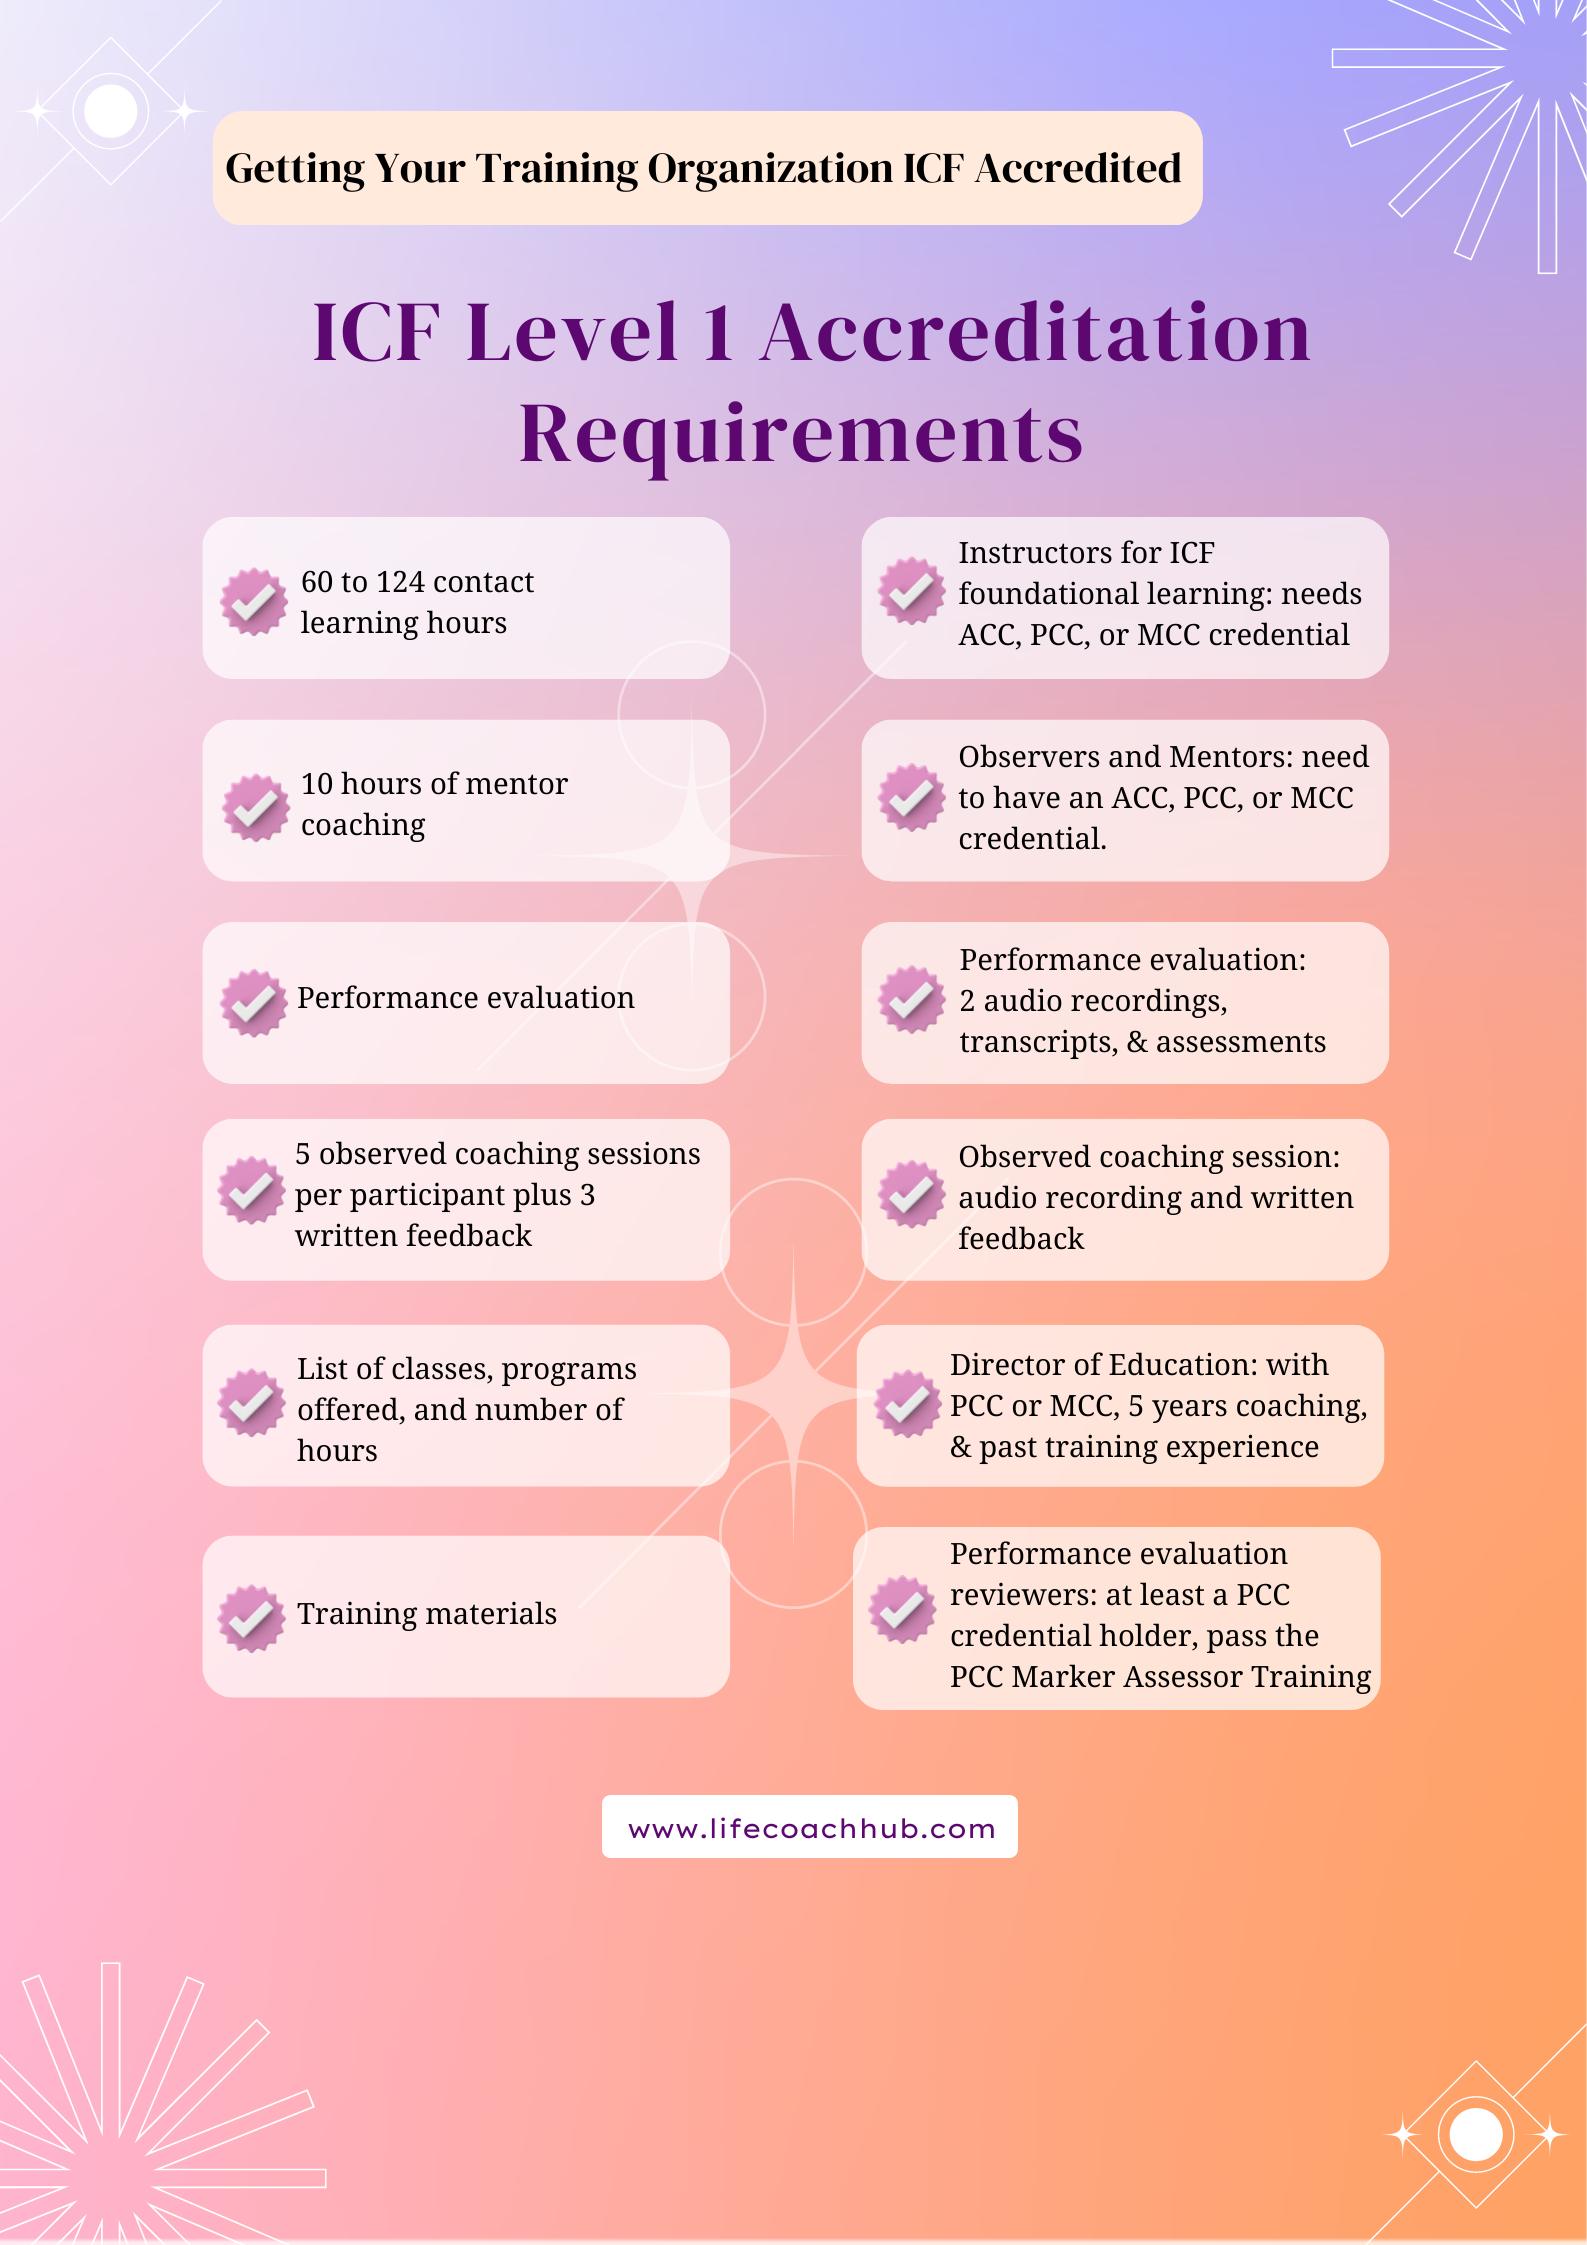 ICF Level 1 Accreditation requirements